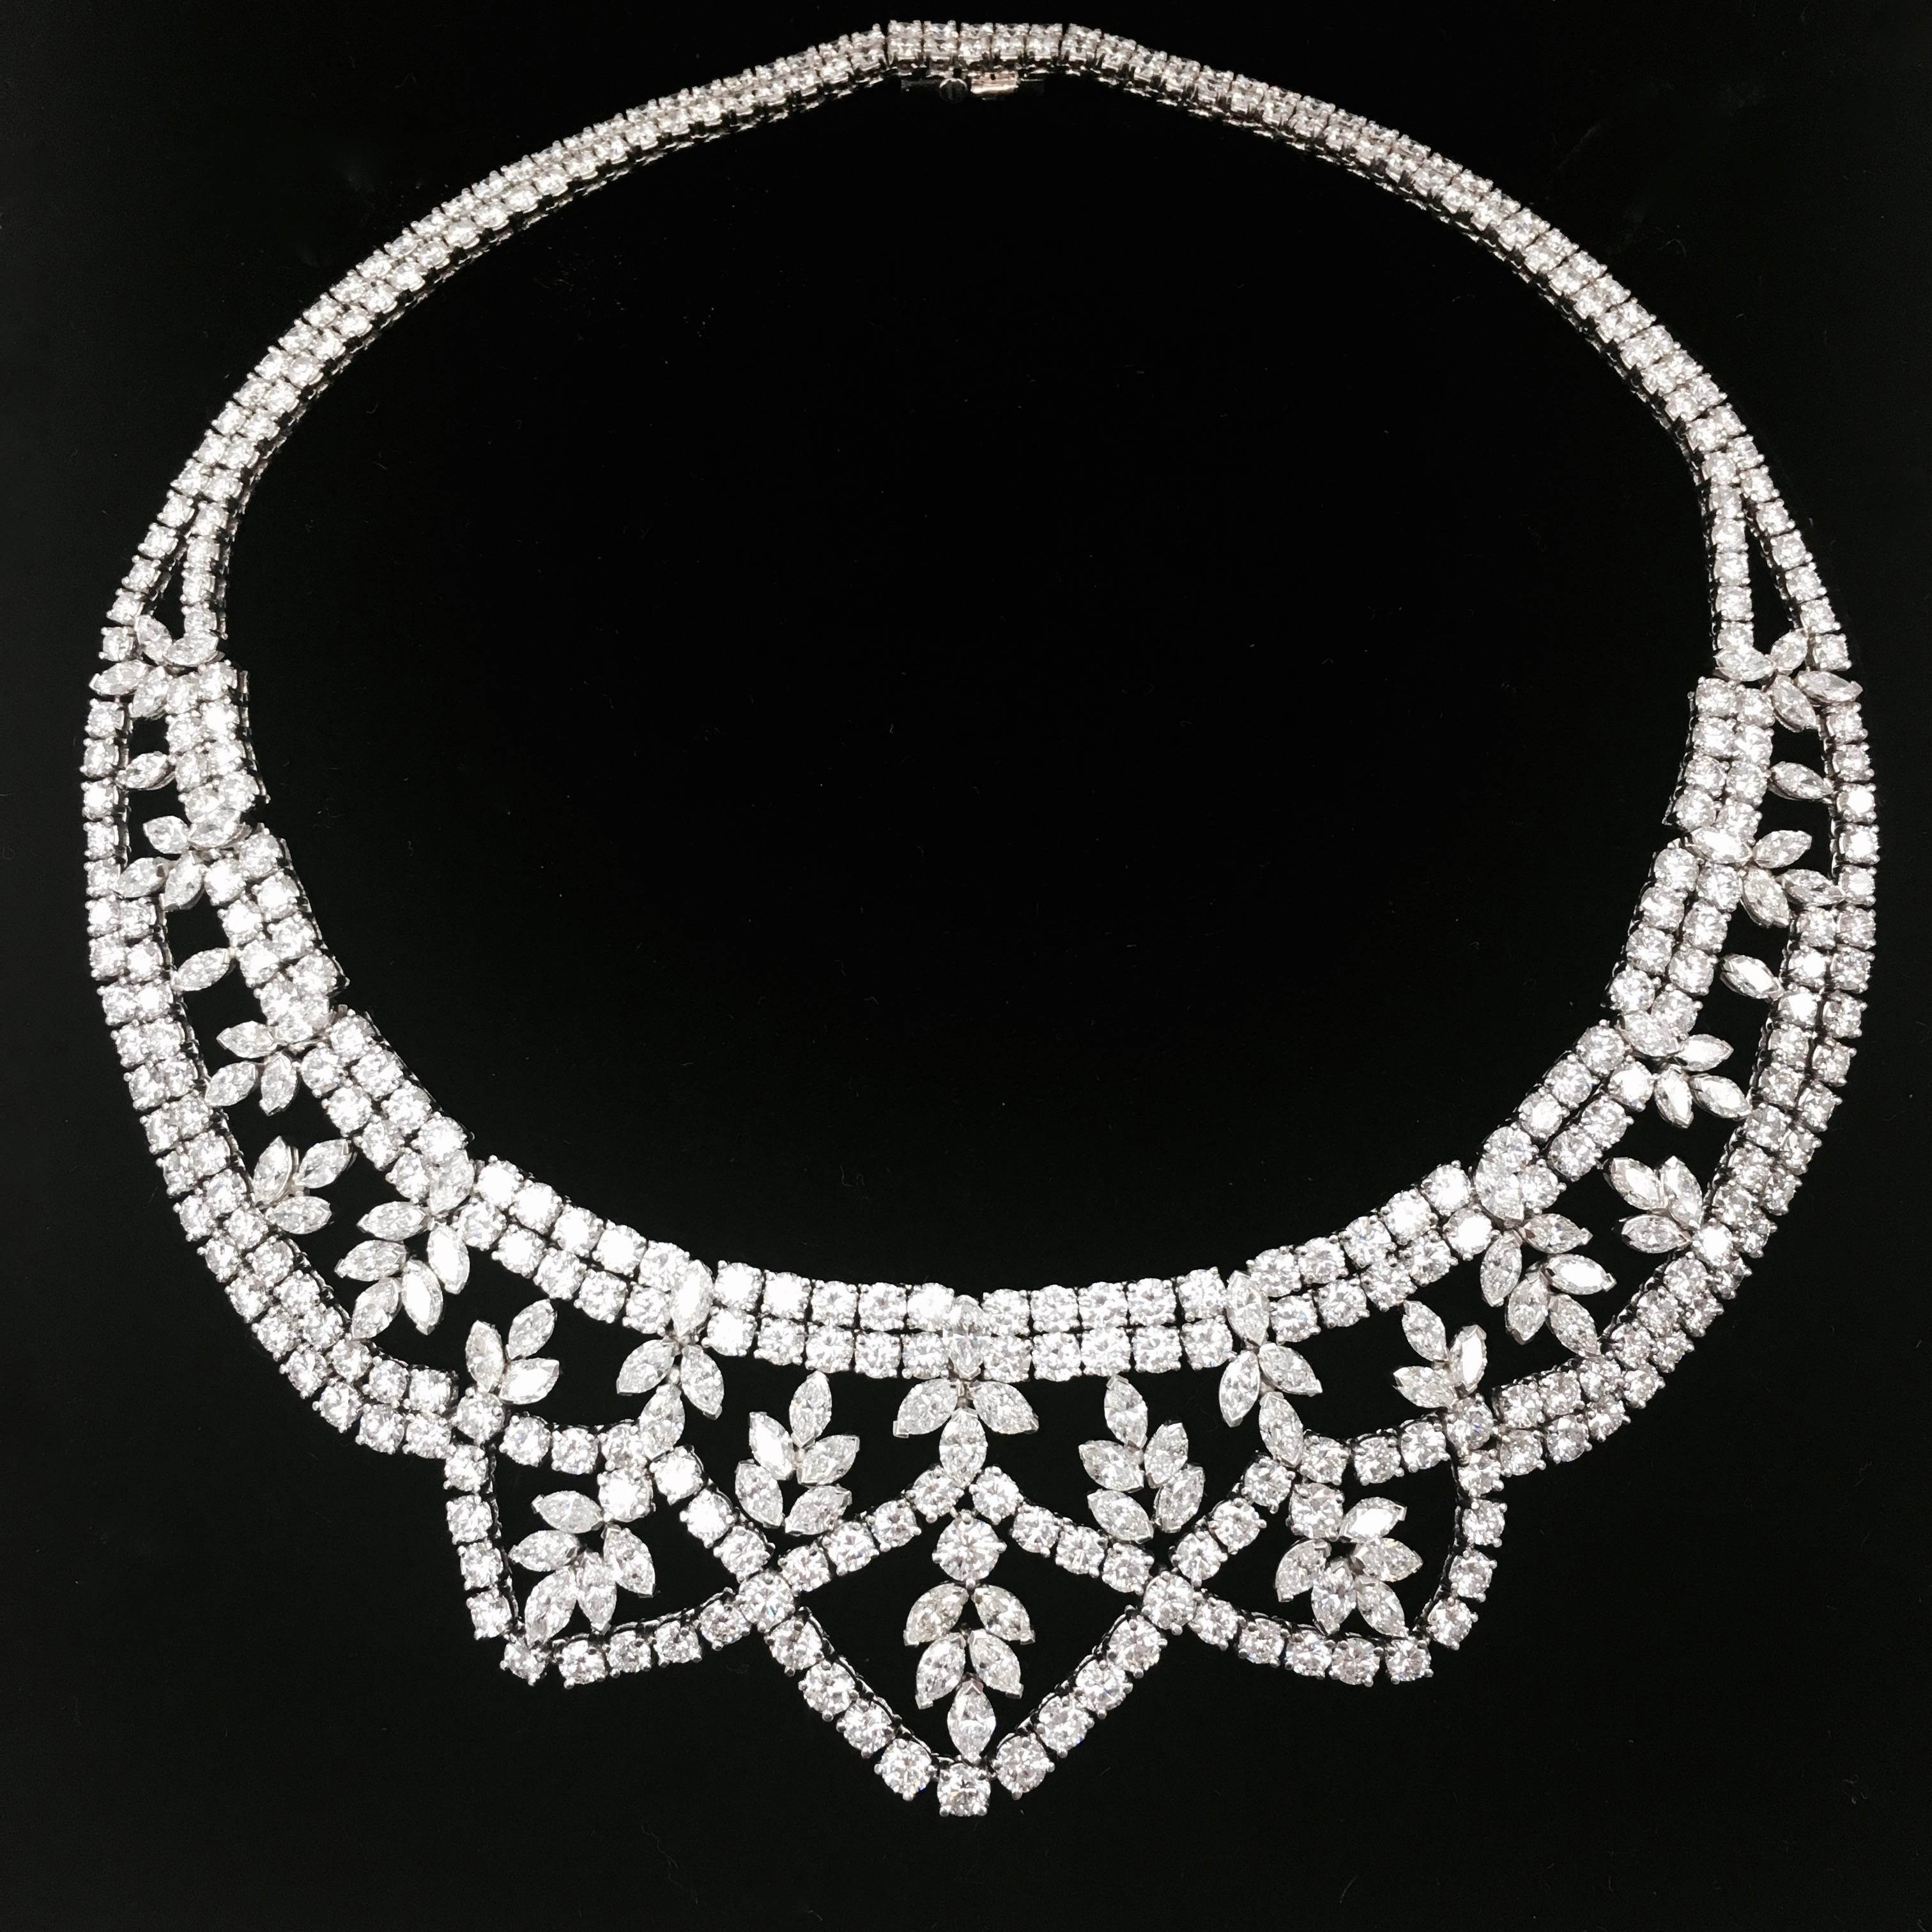 Elegand platinum diamond garland style necklace set with 431 round brilliant and marquise cut sparkling, high quality diamonds. 
Approximate total diamond weight: 59 carats, Color: F-G, Clarity: VS1-VS2
Length: 15 inches
Weight: 113.2 grams